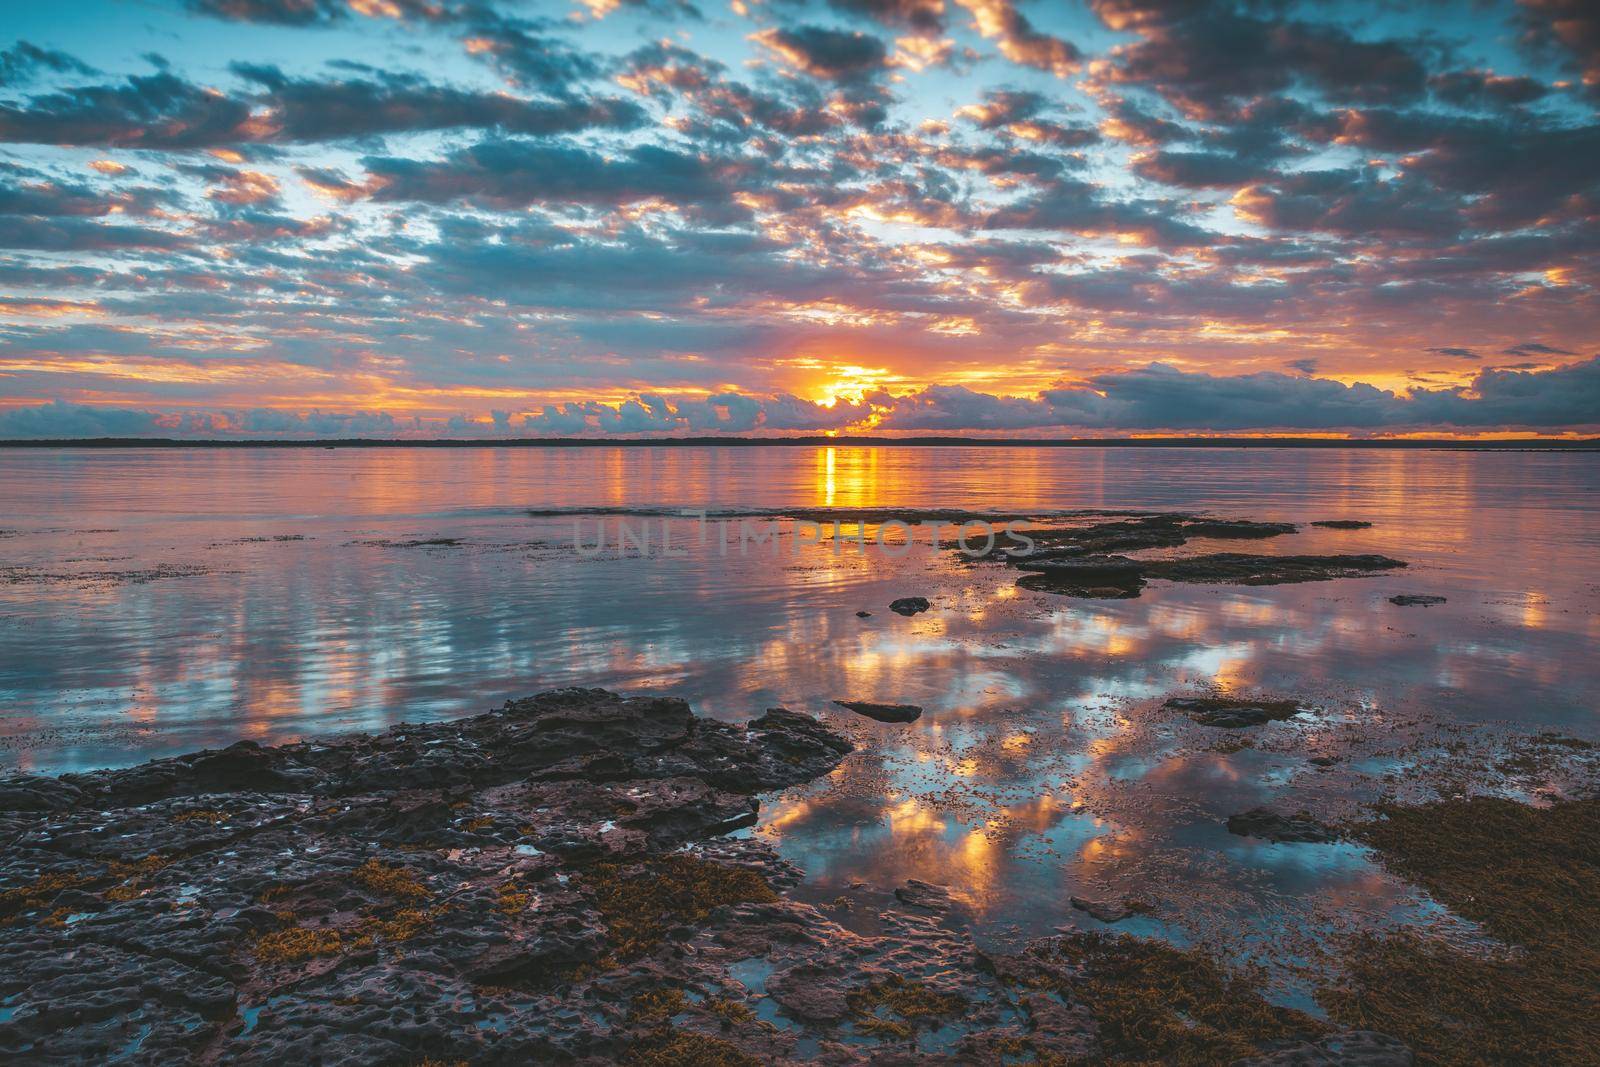 Tranquil waters and reflections of Jervis Bay.  A golden orange sun lights up the clouds